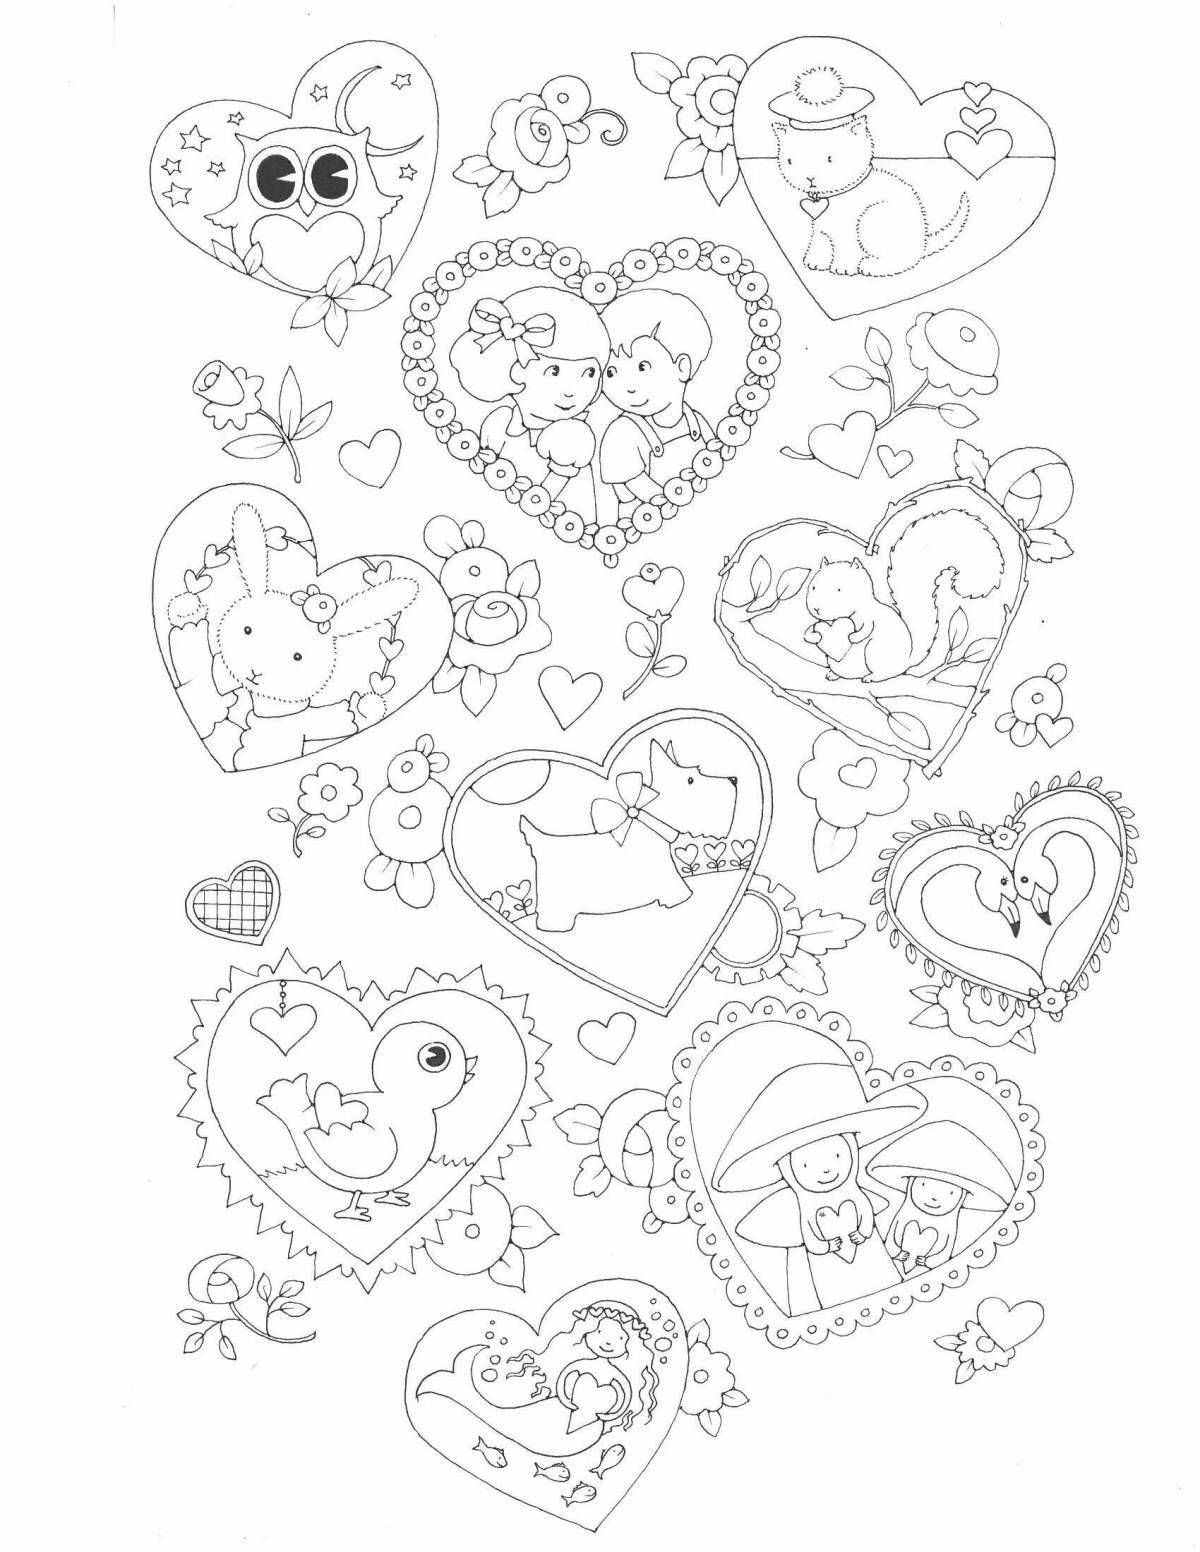 Coloring book charming heart lot